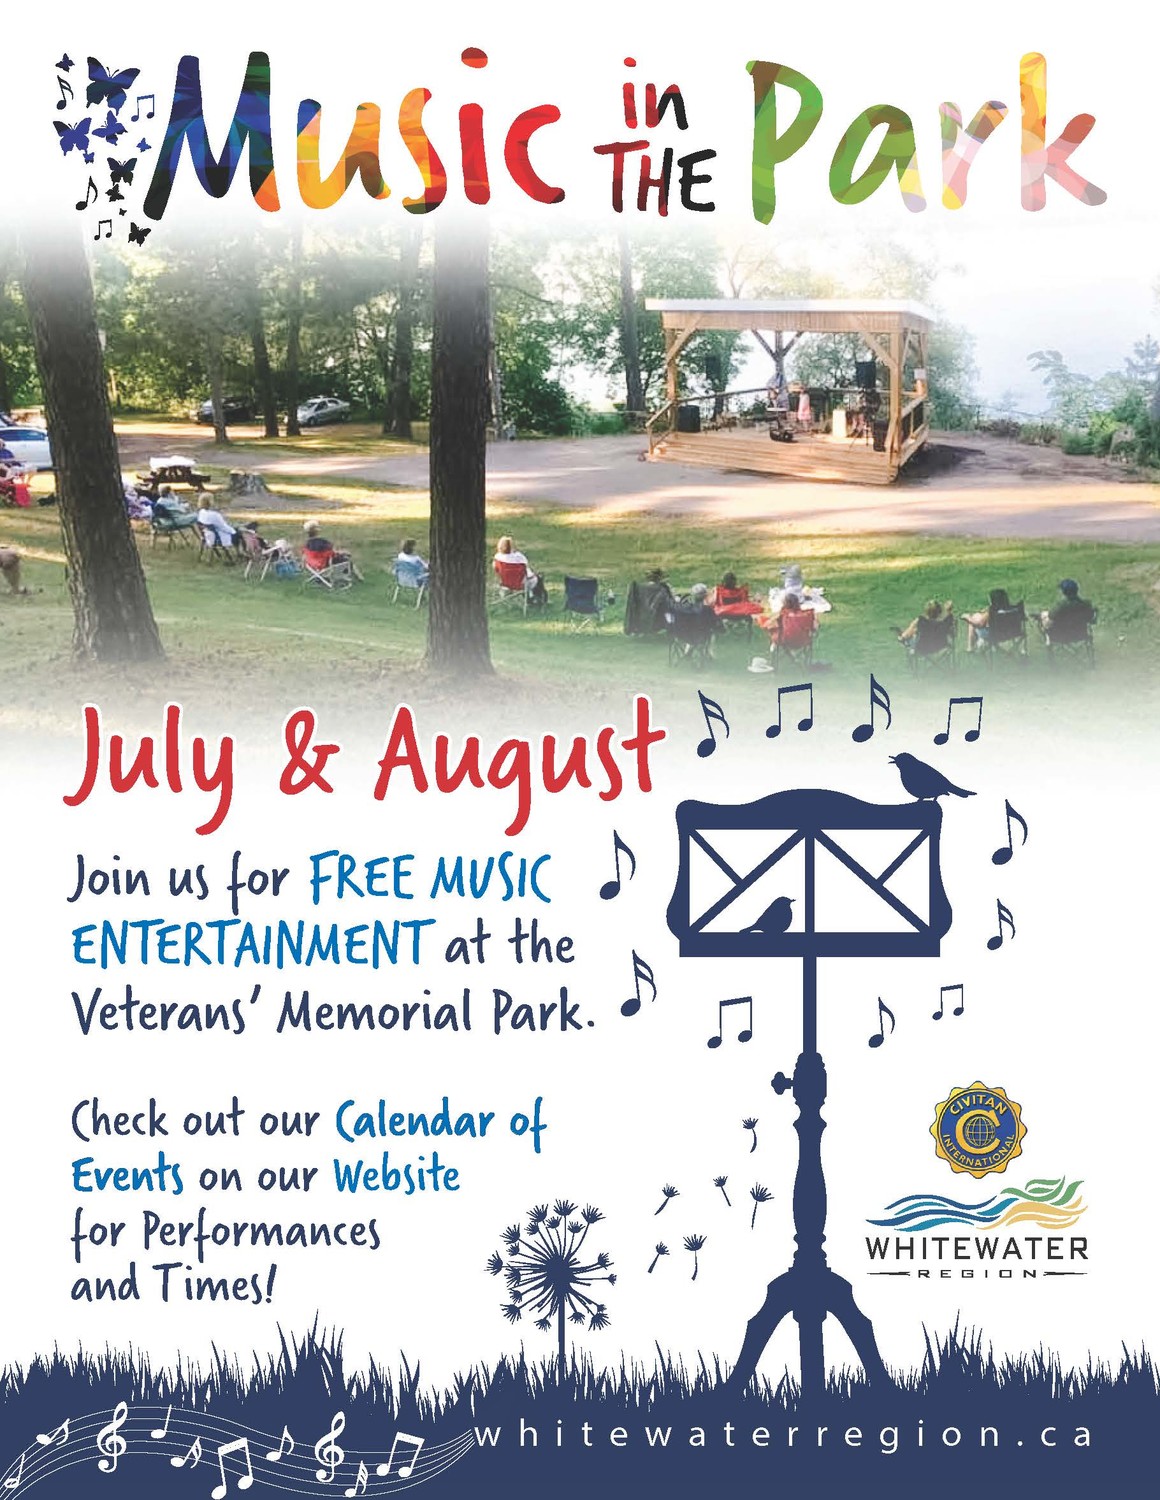 Music in the Park Whitewater Region